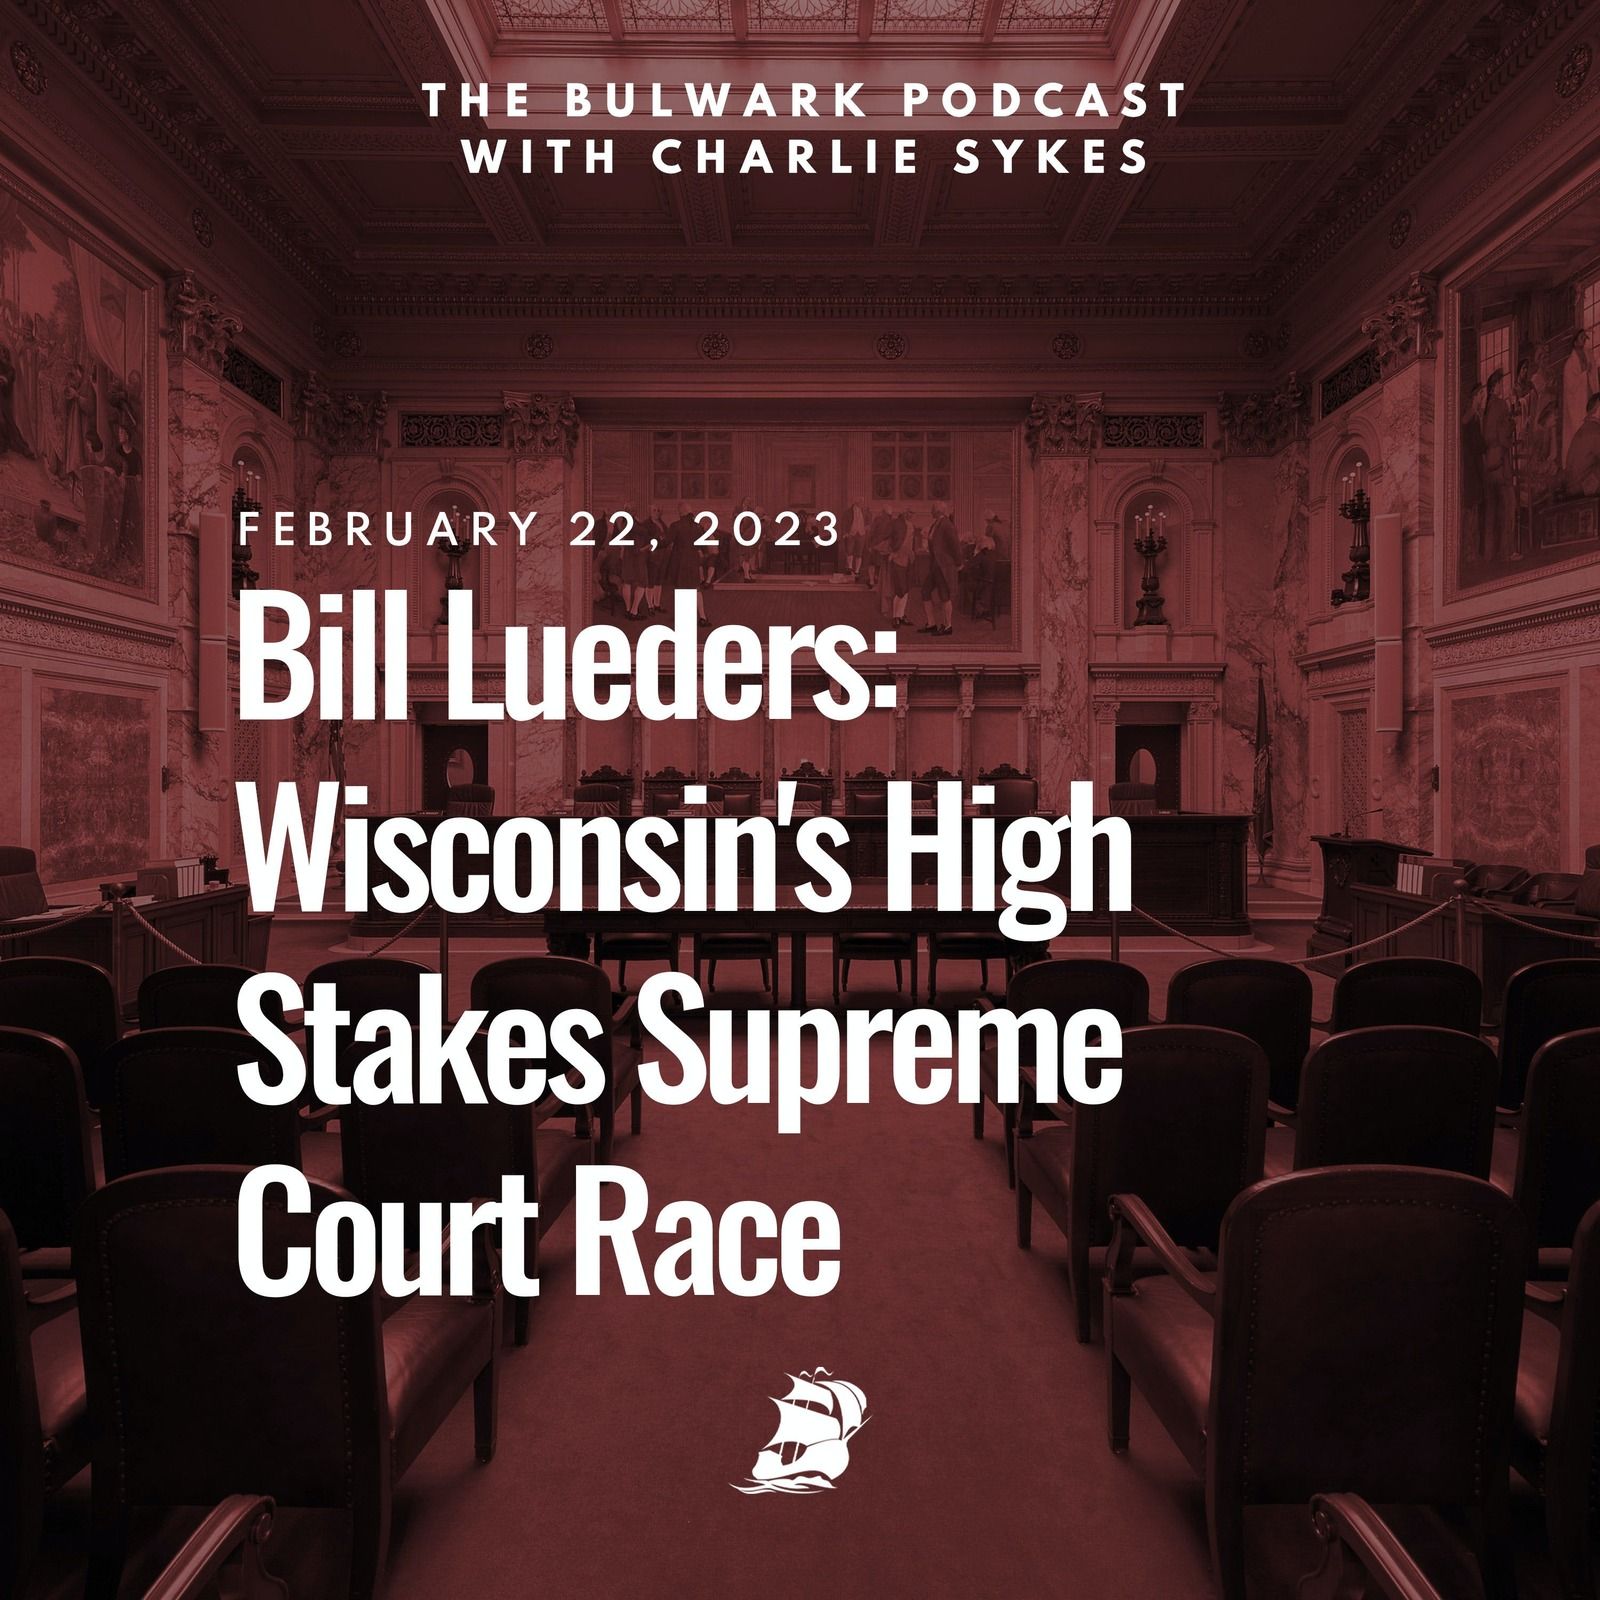 Bill Lueders: Wisconsin's High Stakes Supreme Court Race  by The Bulwark Podcast